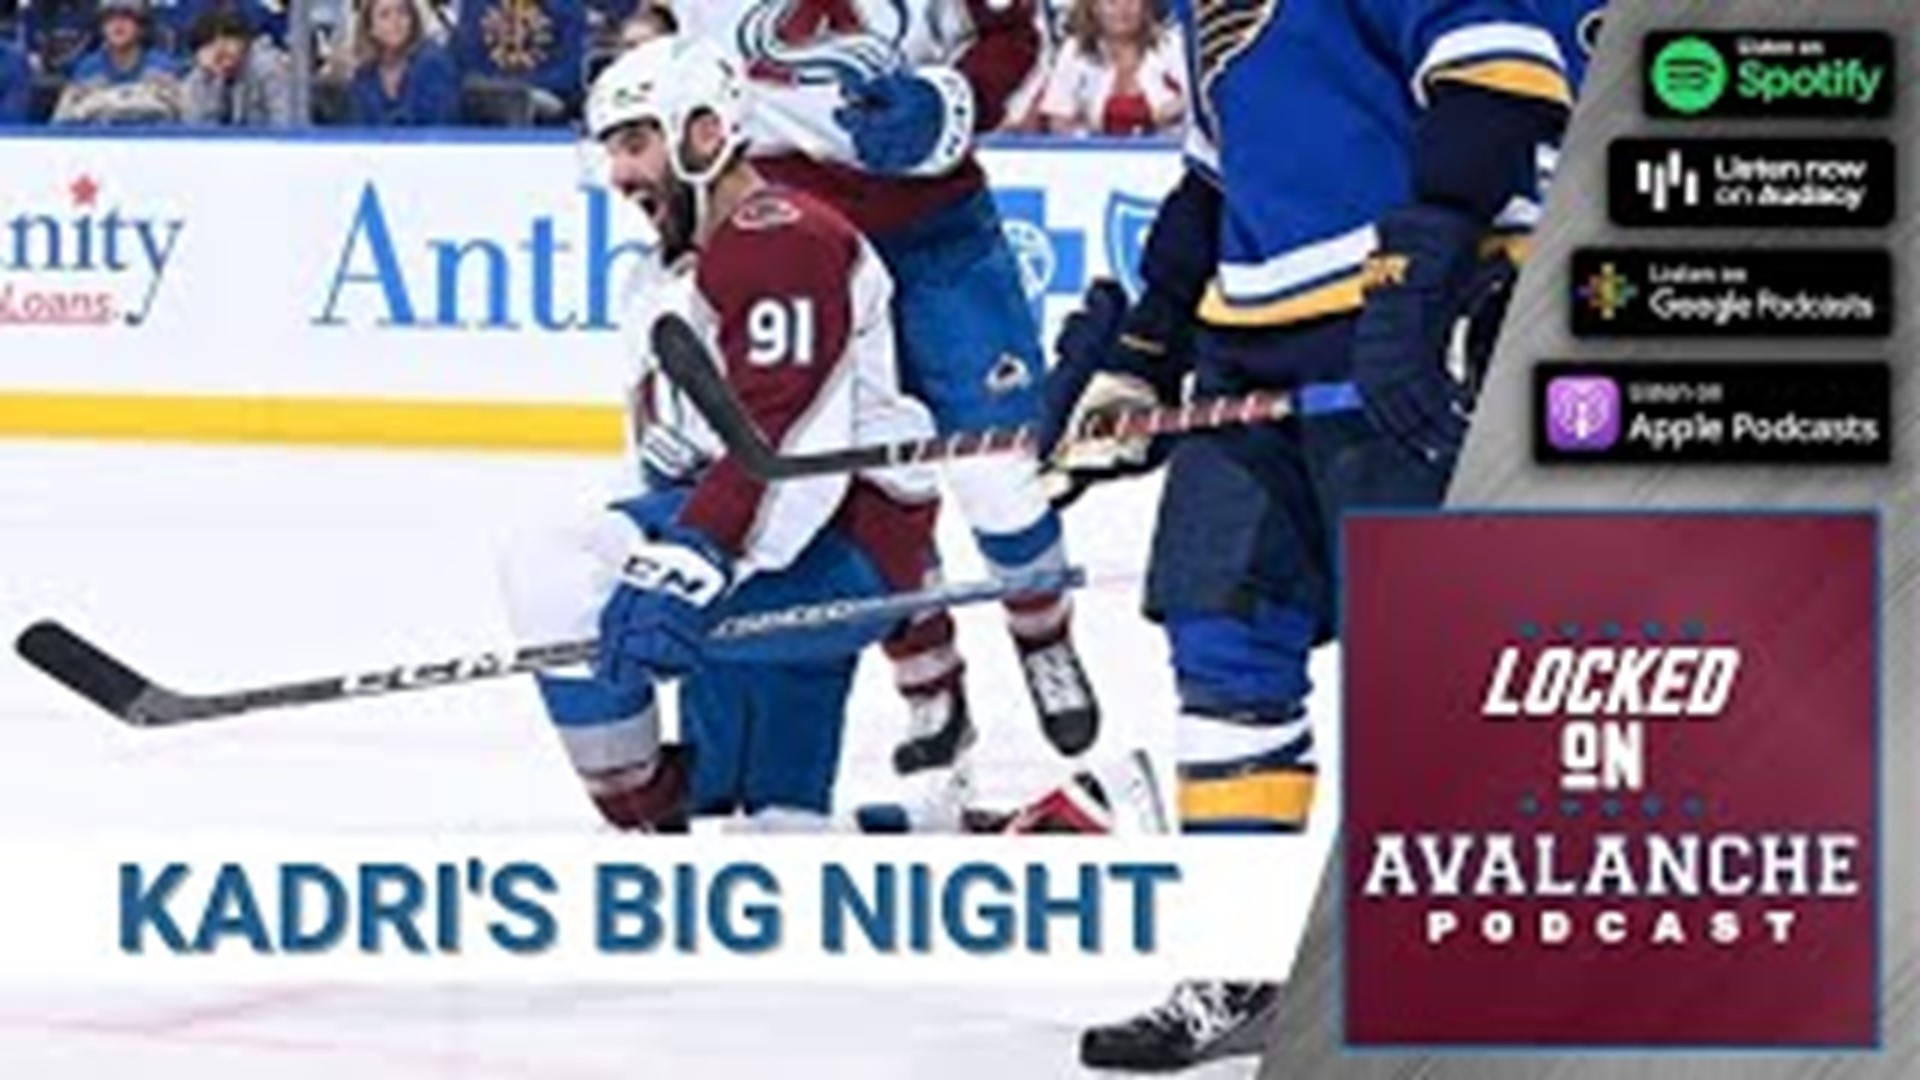 Kadri helped his Colorado Avalanche to a 6-3 win over the St. Louis Blues and now take a commanding 3-1 series lead back to Denver.